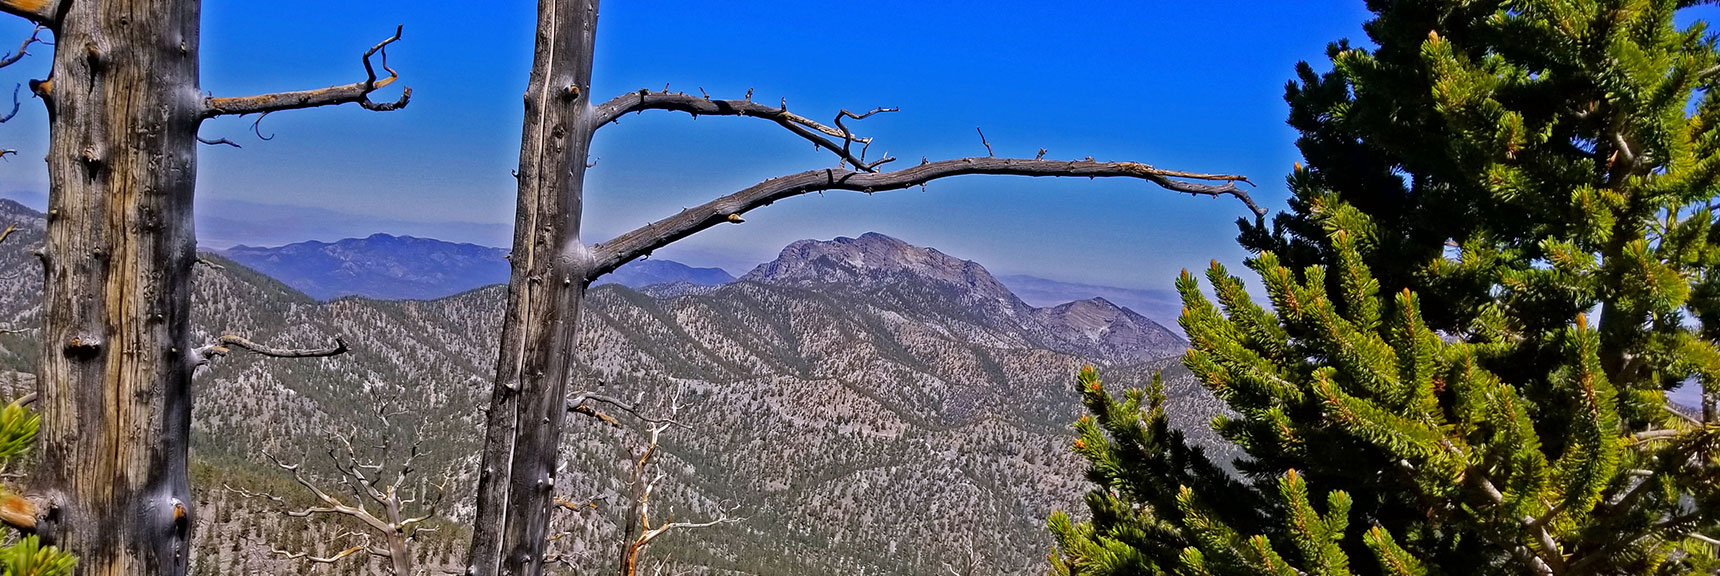 Higher View of McFarland Peak While Closing in on High Ridge Summit of Lee/Kyle Canyons | Lee to Kyle Canyon | Foxtail Approach | Mt Charleston Wilderness | Spring Mountains, Nevada